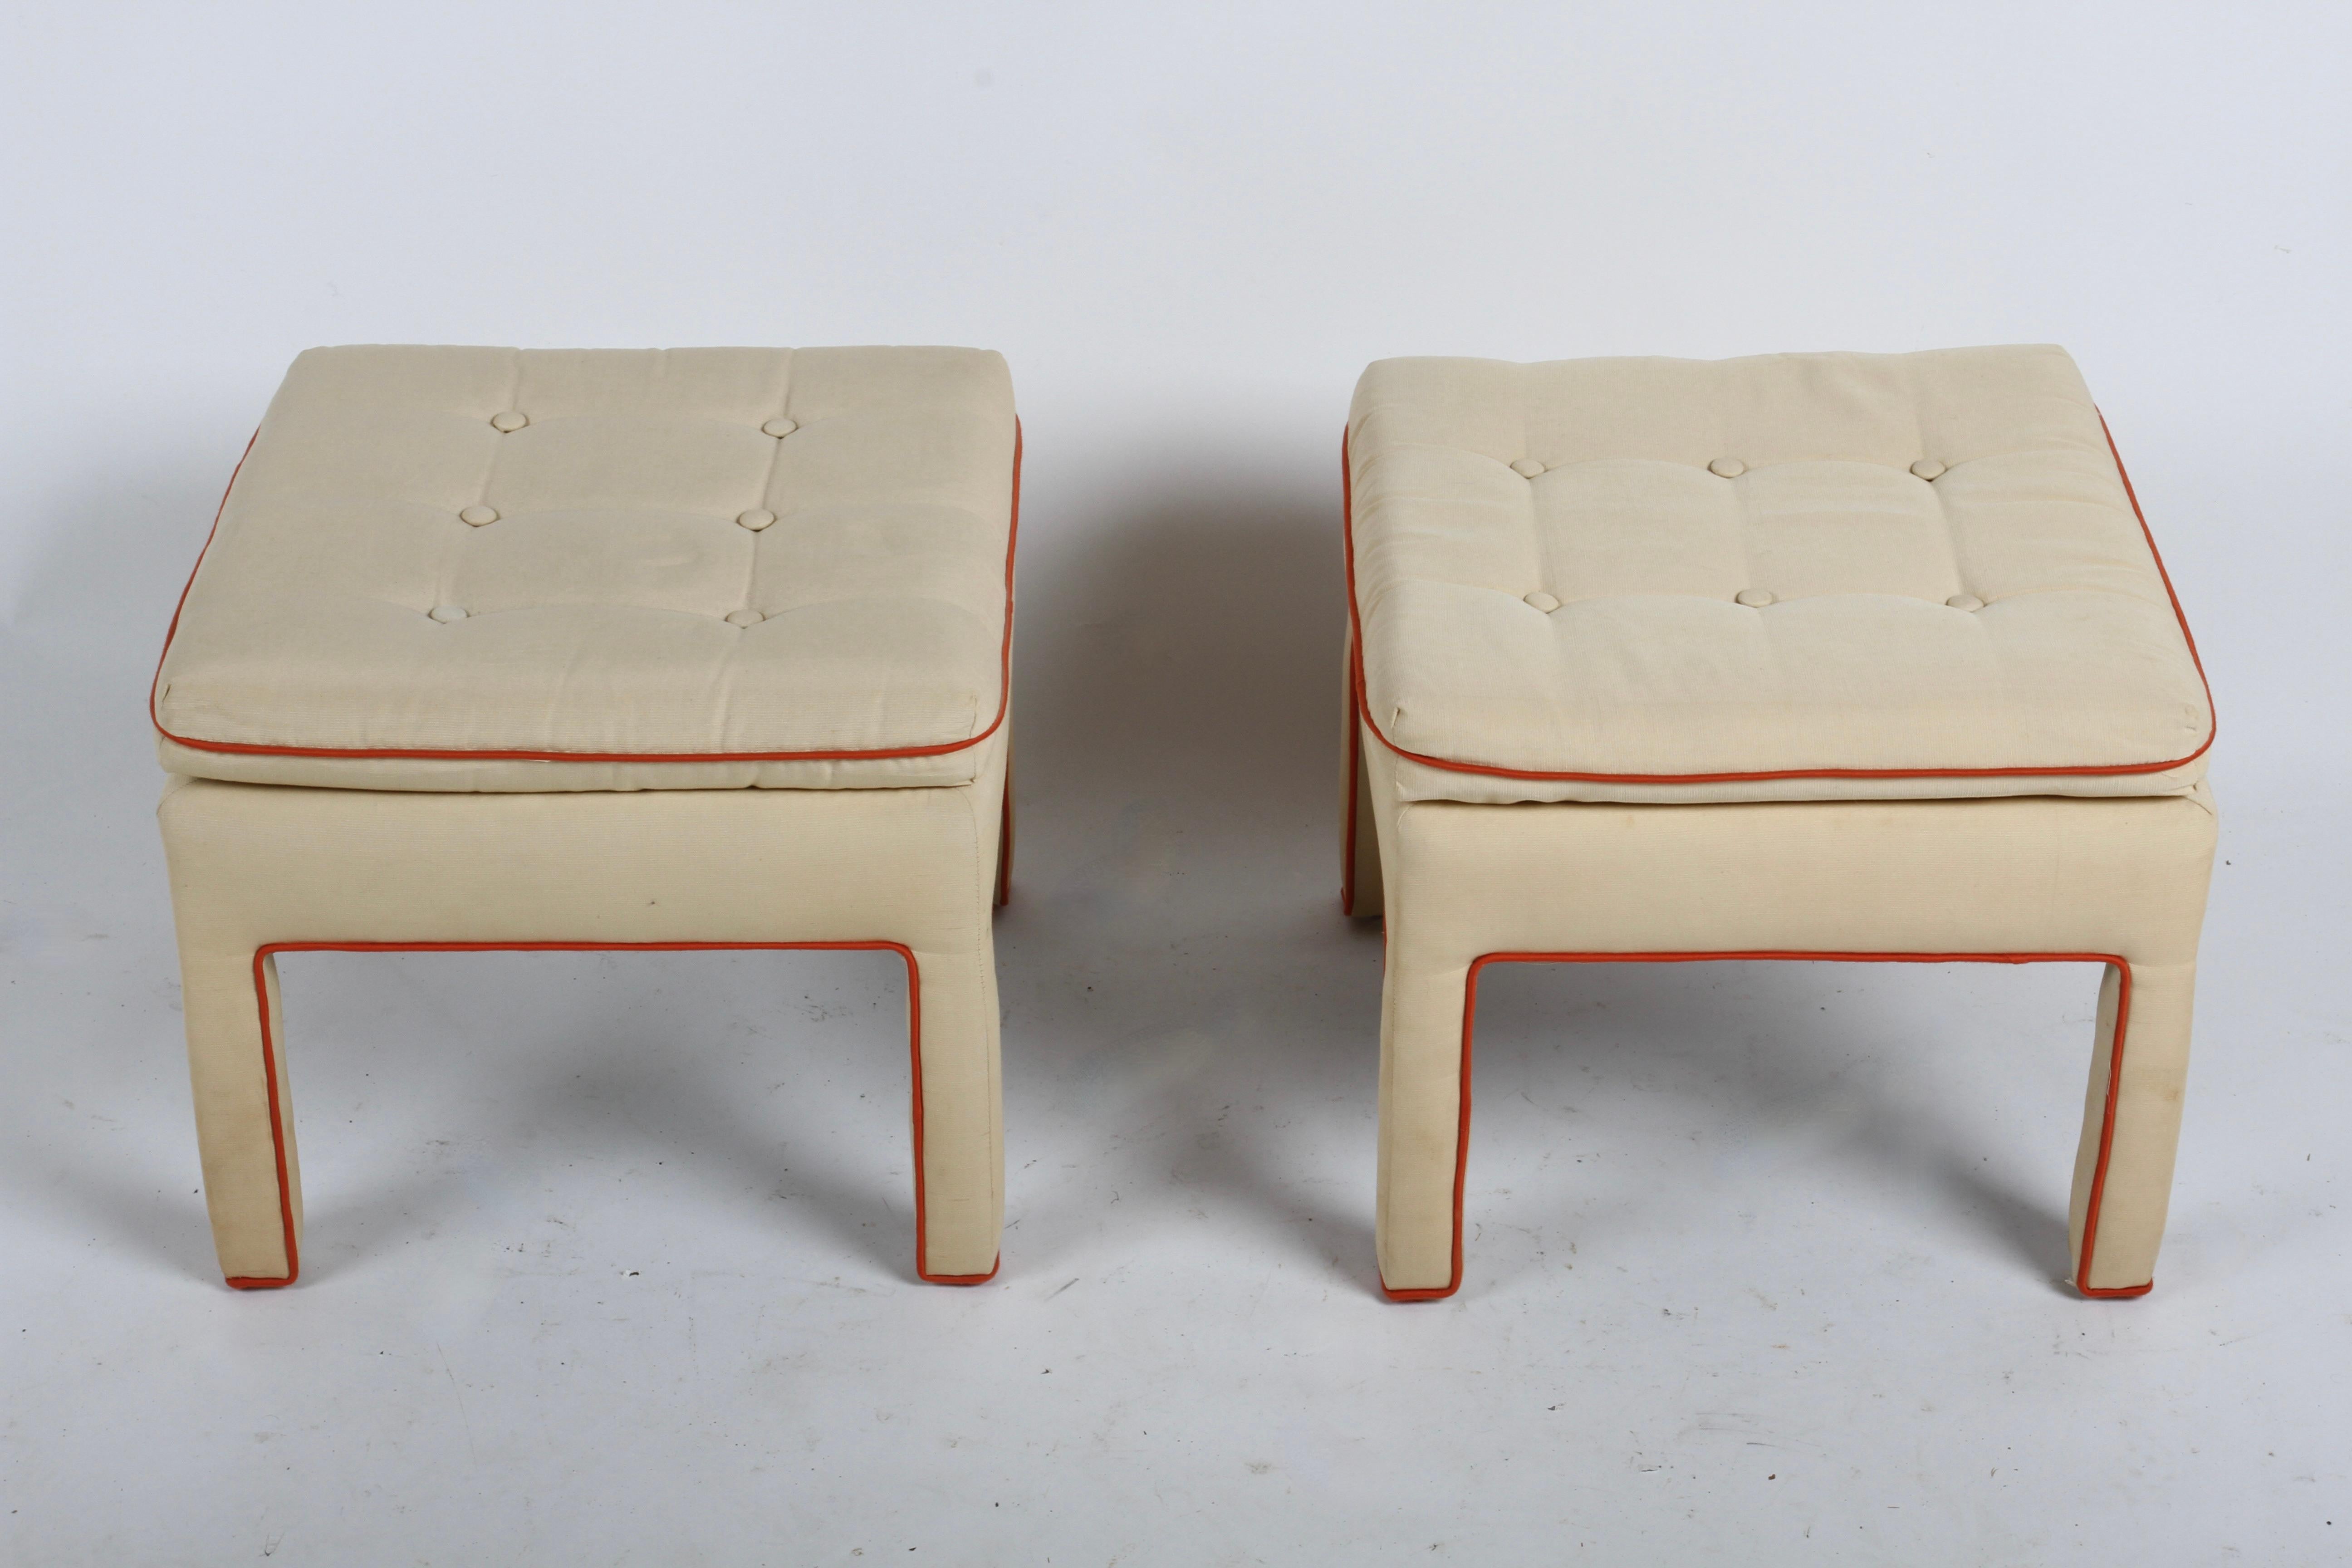 Pair of 1980s Billy Baldwin Style Pillow Top Tufted Fully Upholstered Ottomans In Good Condition For Sale In St. Louis, MO